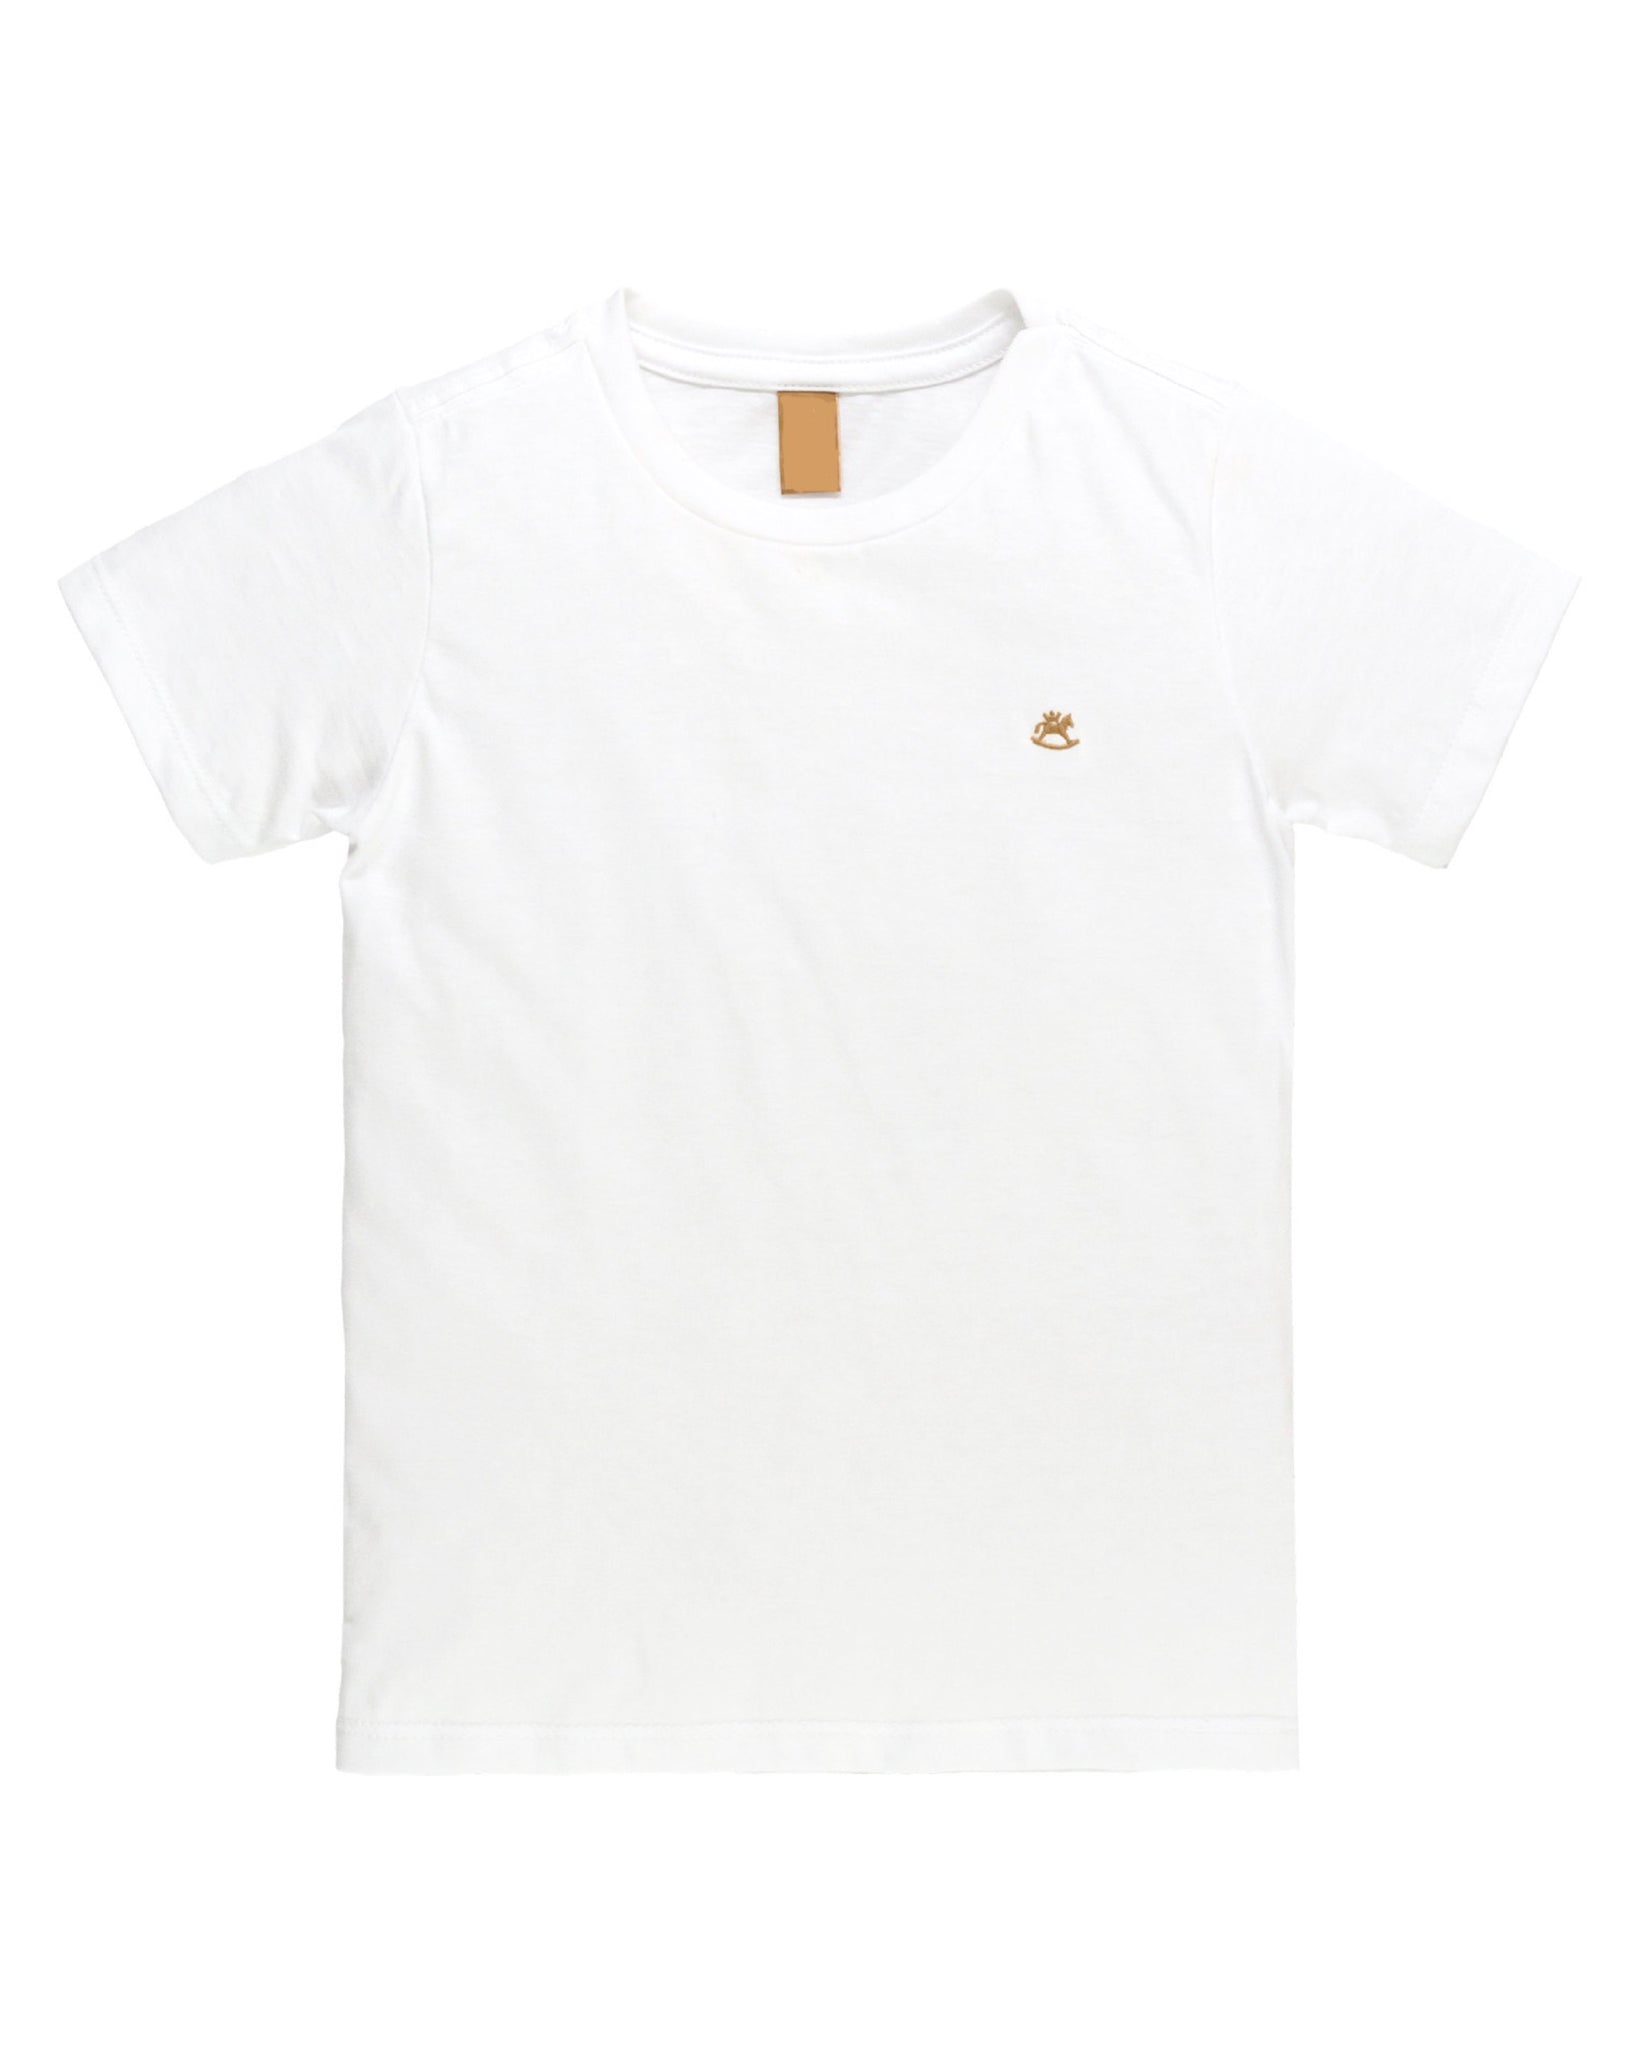 White Solid T-Shirt: 6Y